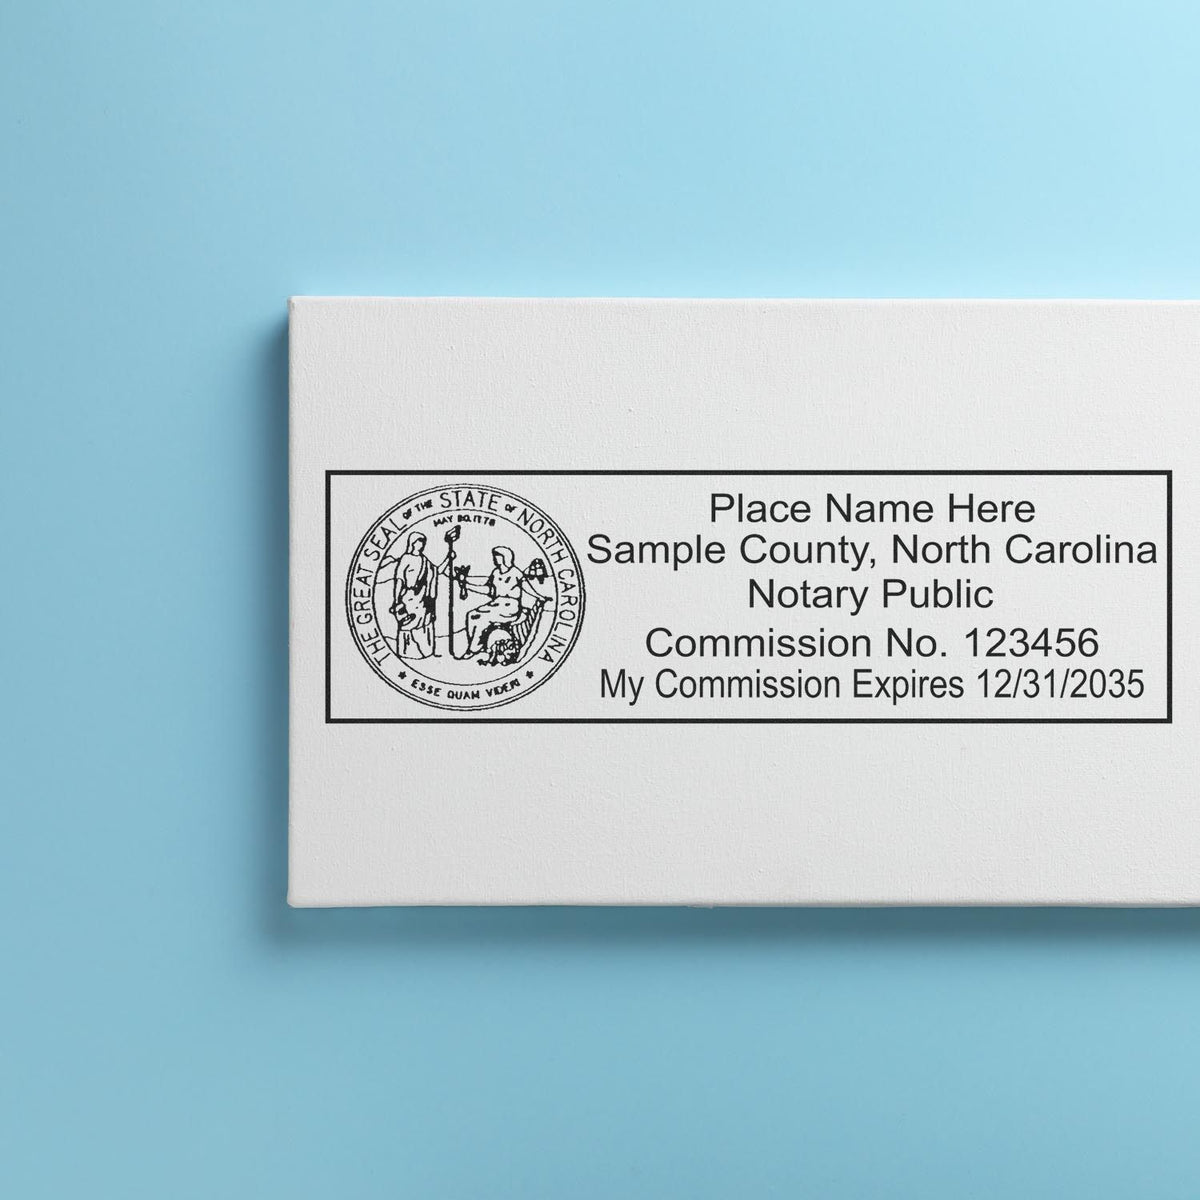 PSI North Carolina Notary Stamp in use photo showing a stamped imprint of the PSI North Carolina Notary Stamp